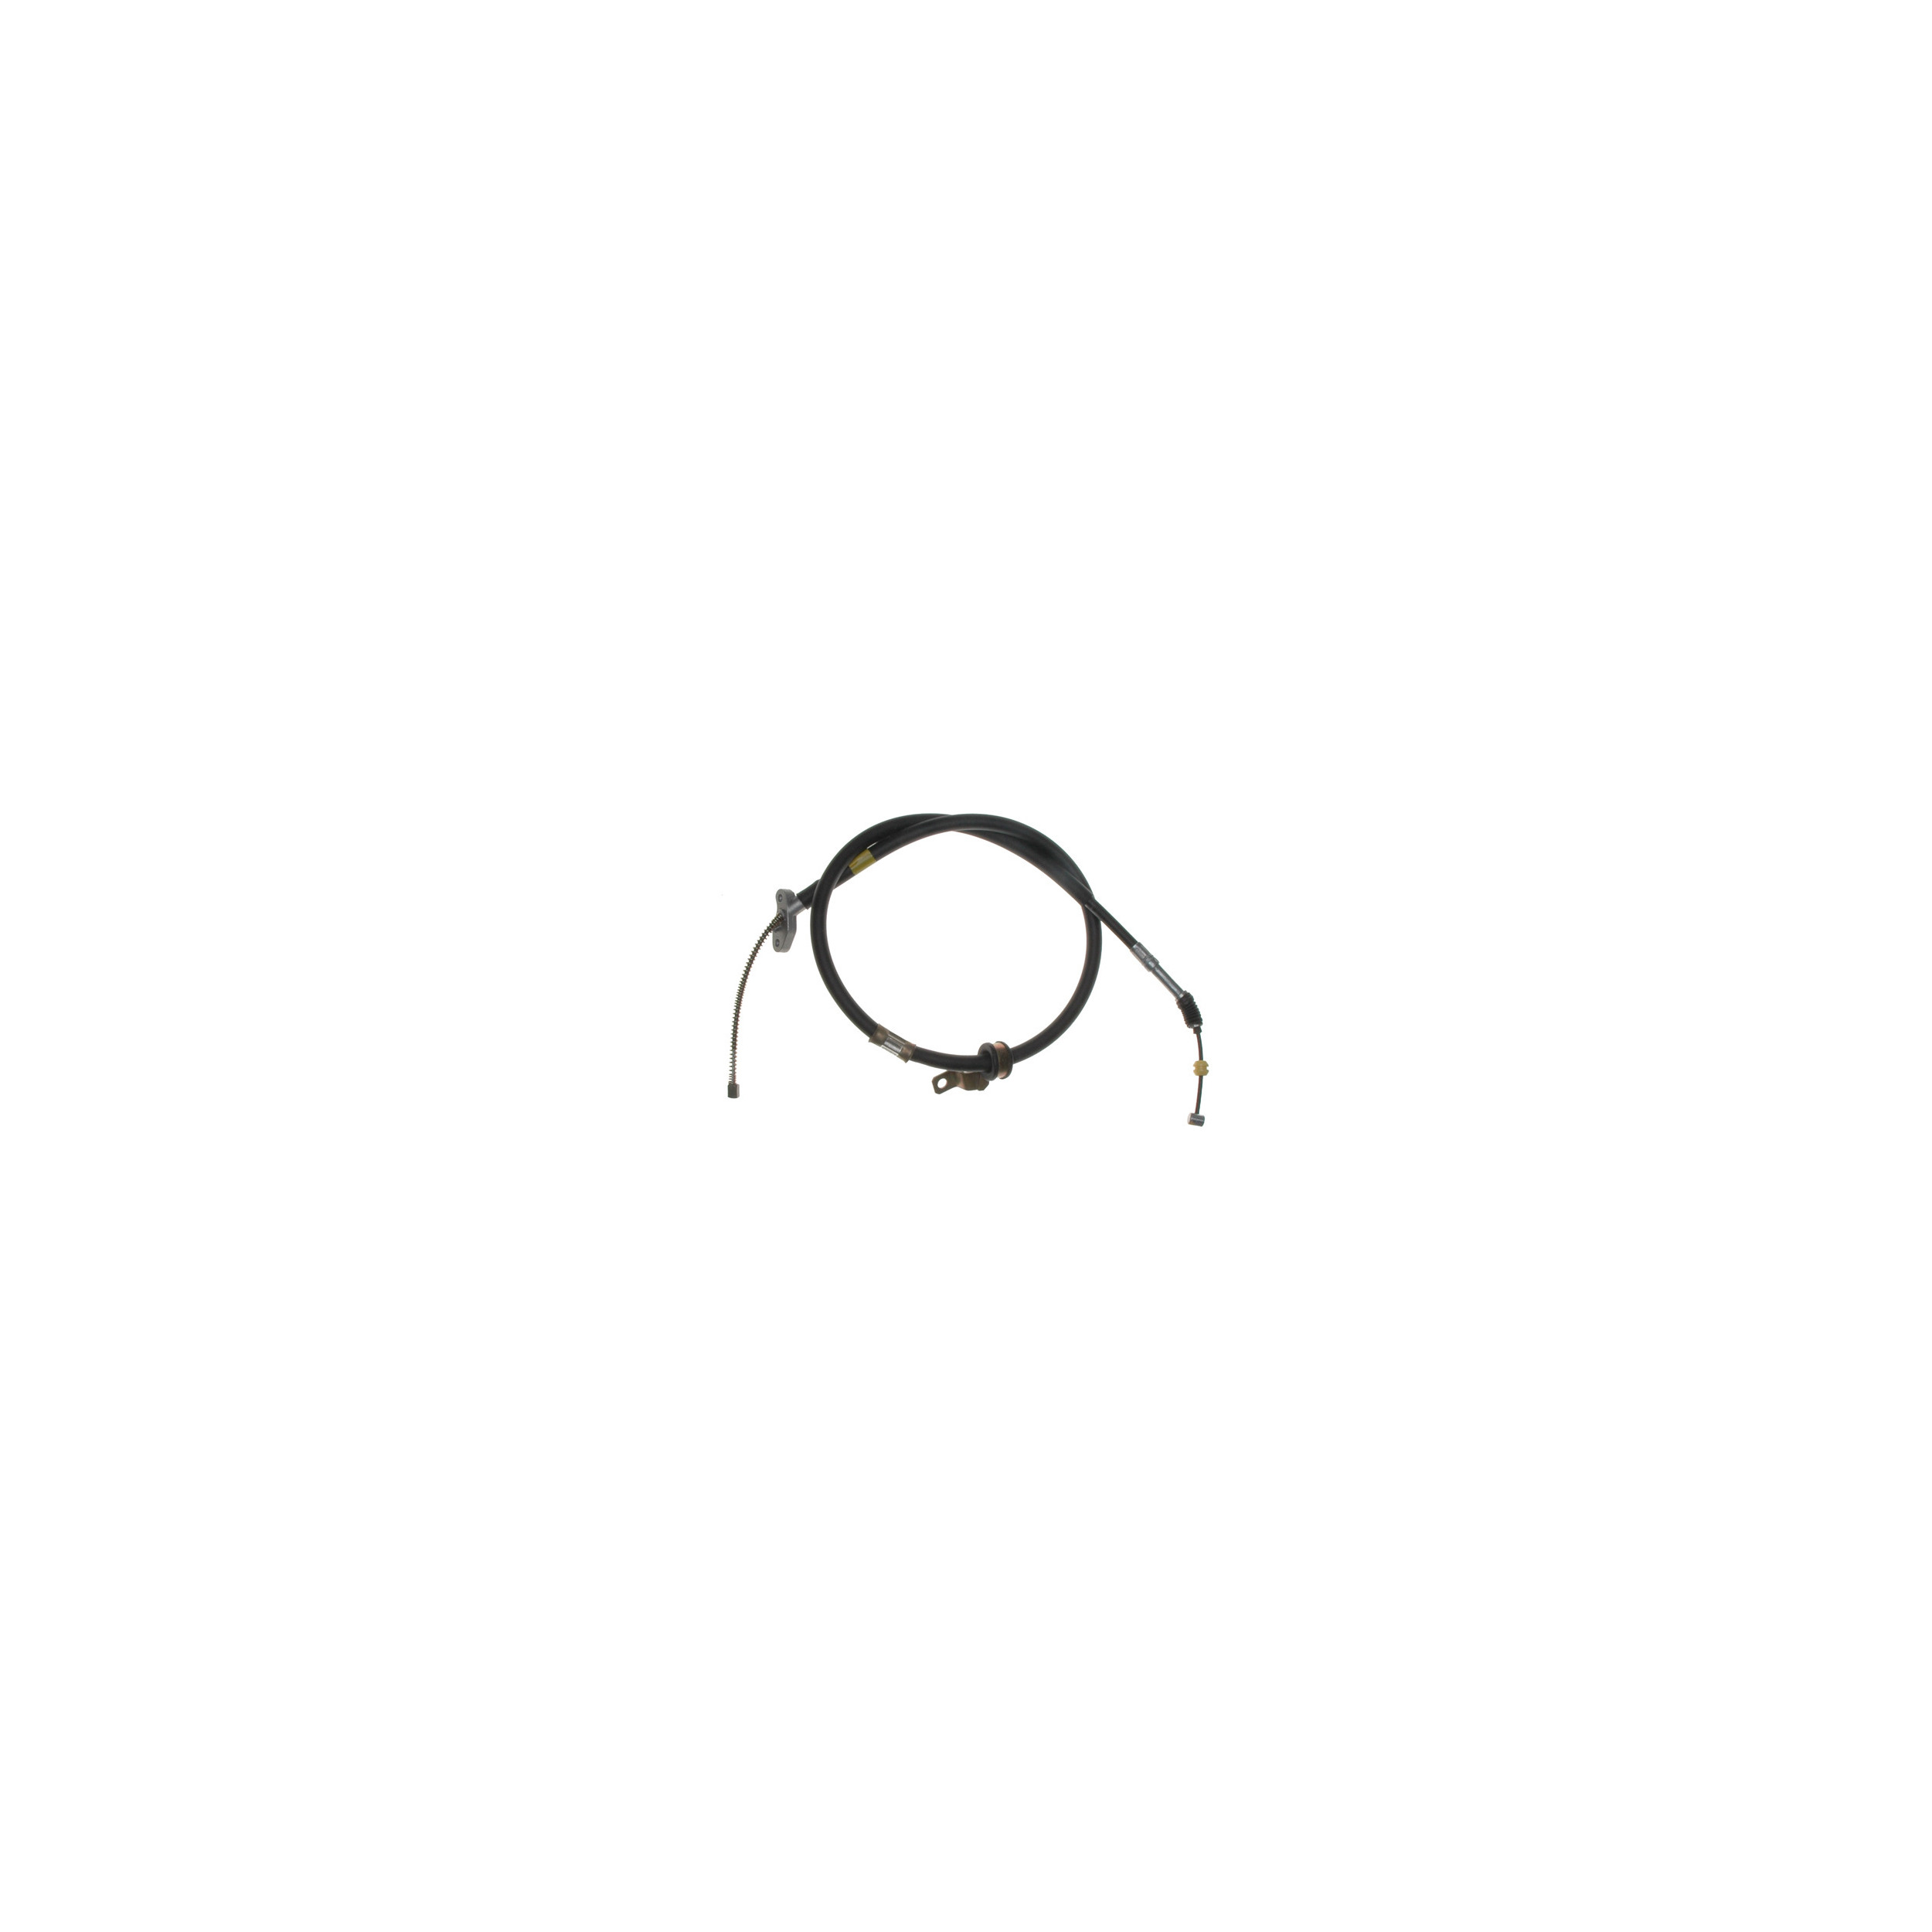 Raybestos Element3 Brake Cables, BC95309 - image 1 of 6